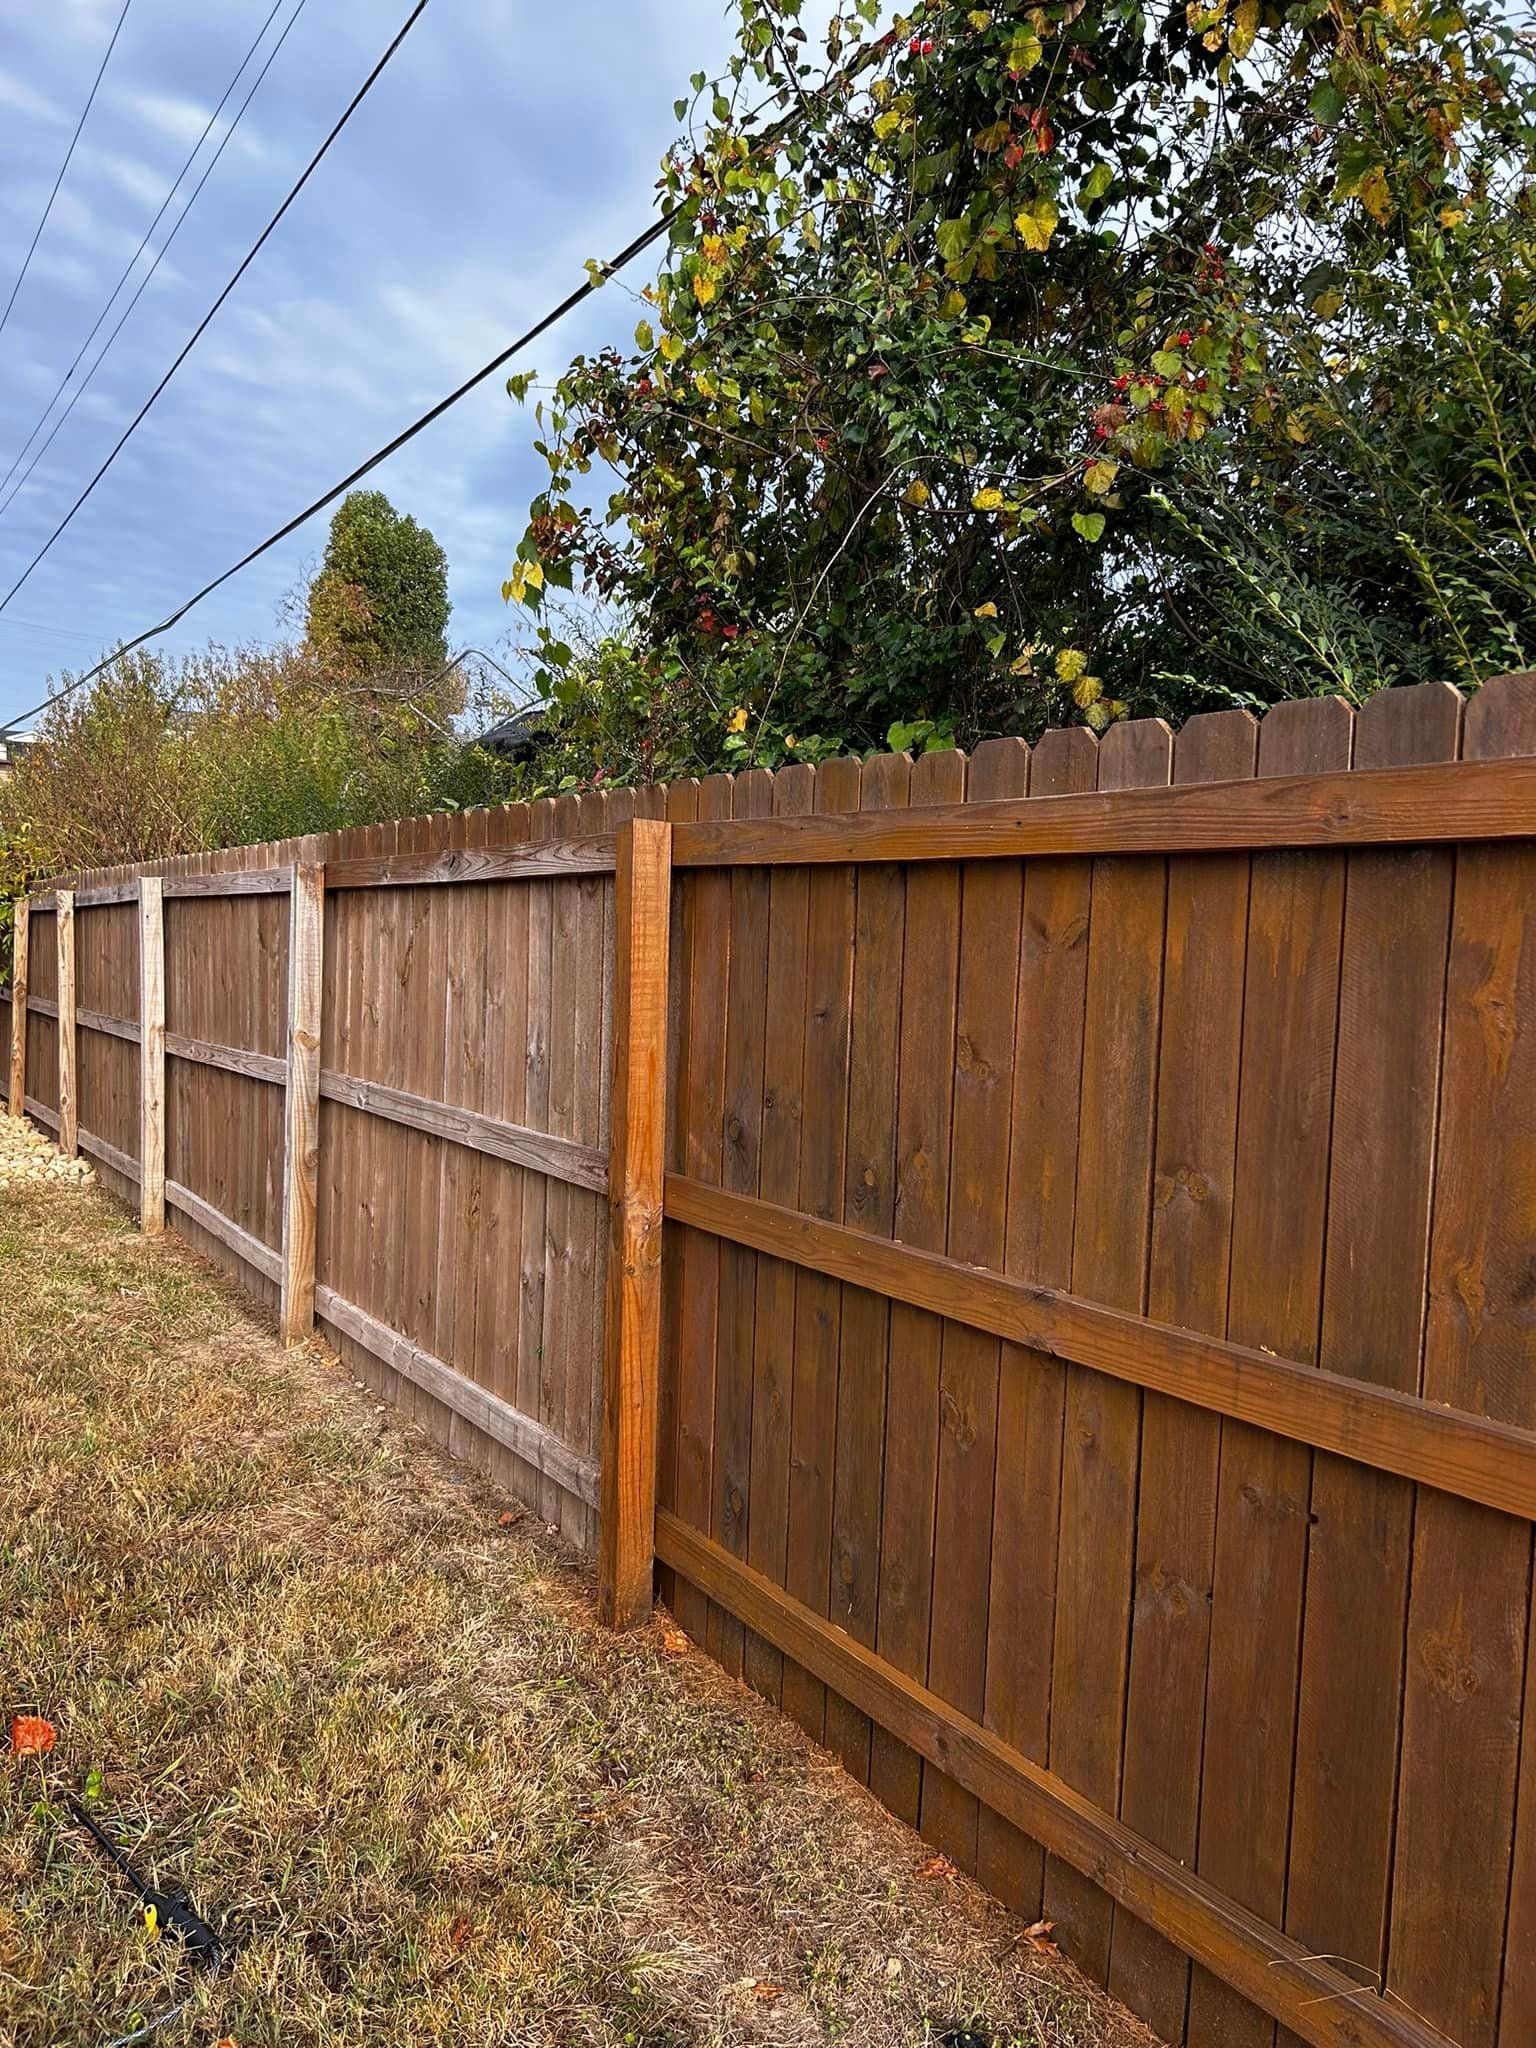 a wooden fence is surrounded by grass and trees in a backyard .